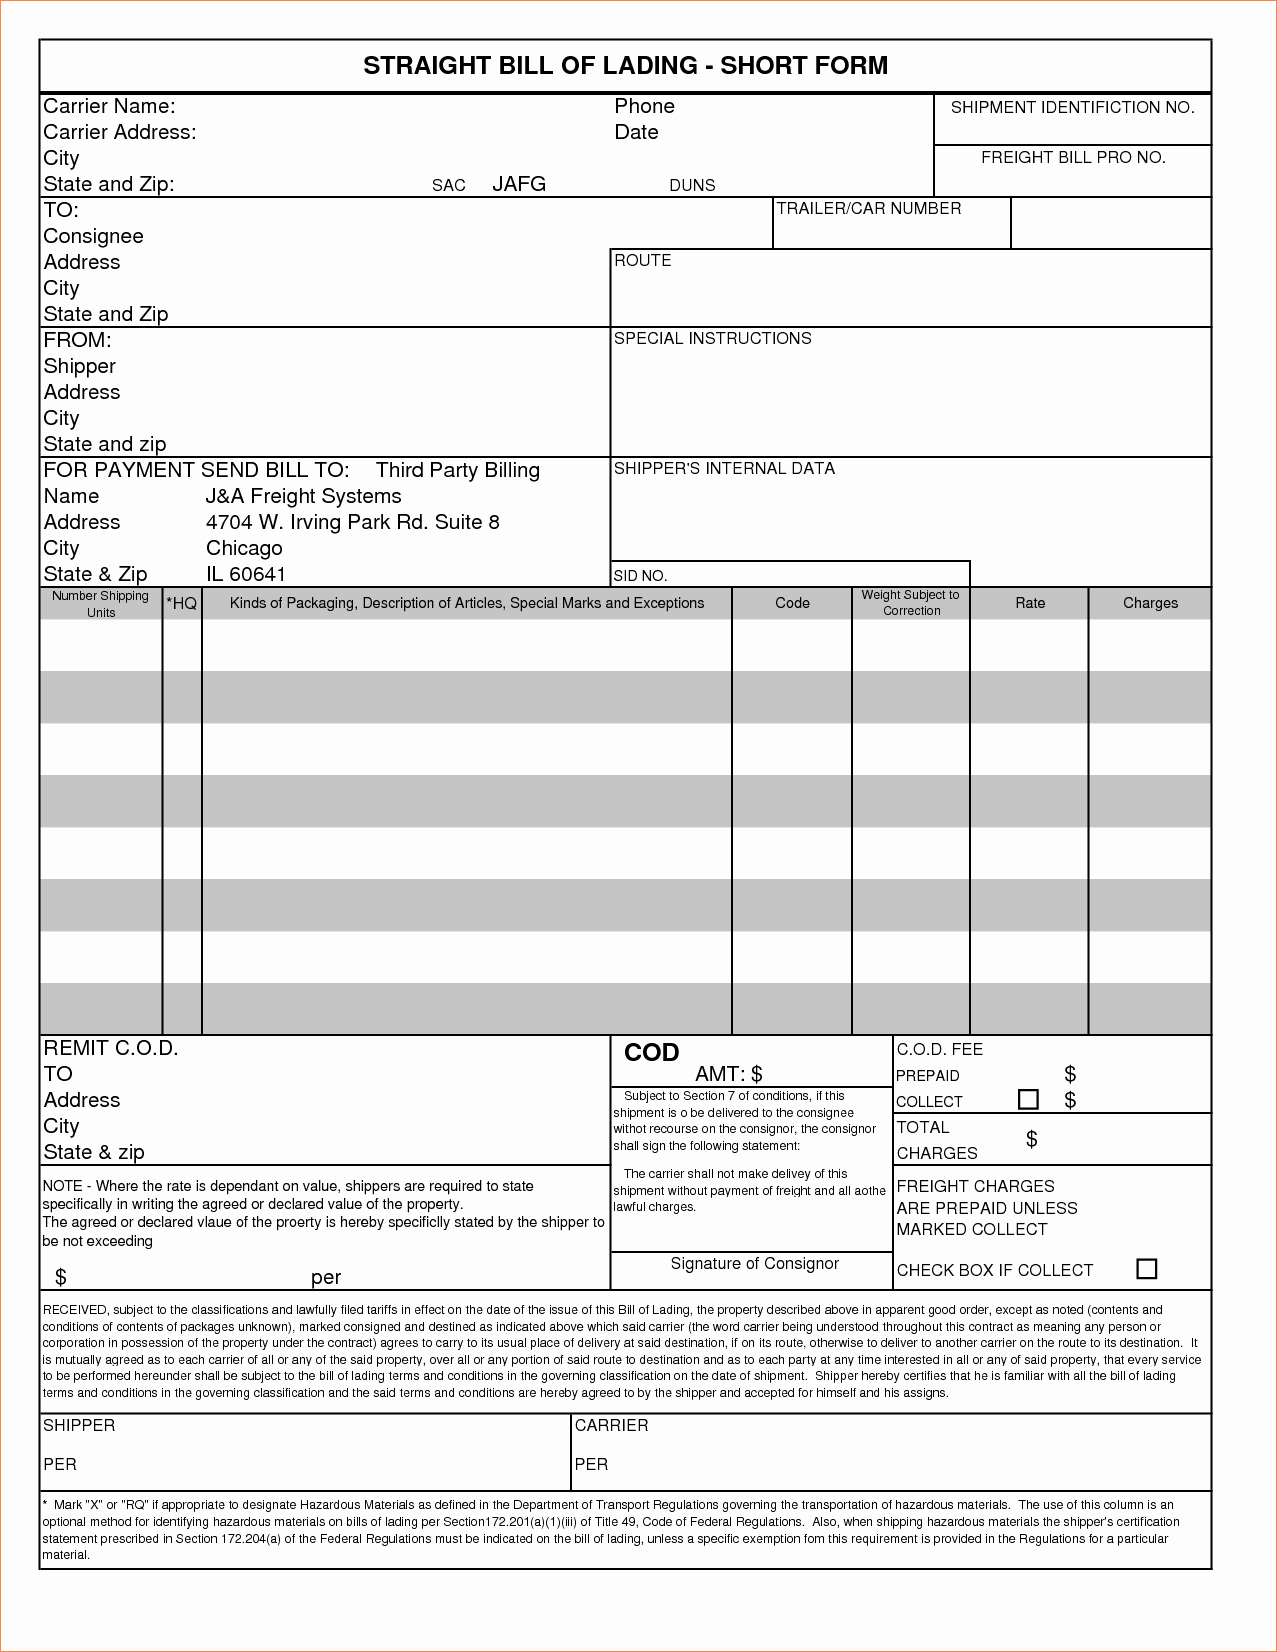 3 Straight Bill Of Lading Templatereport Template